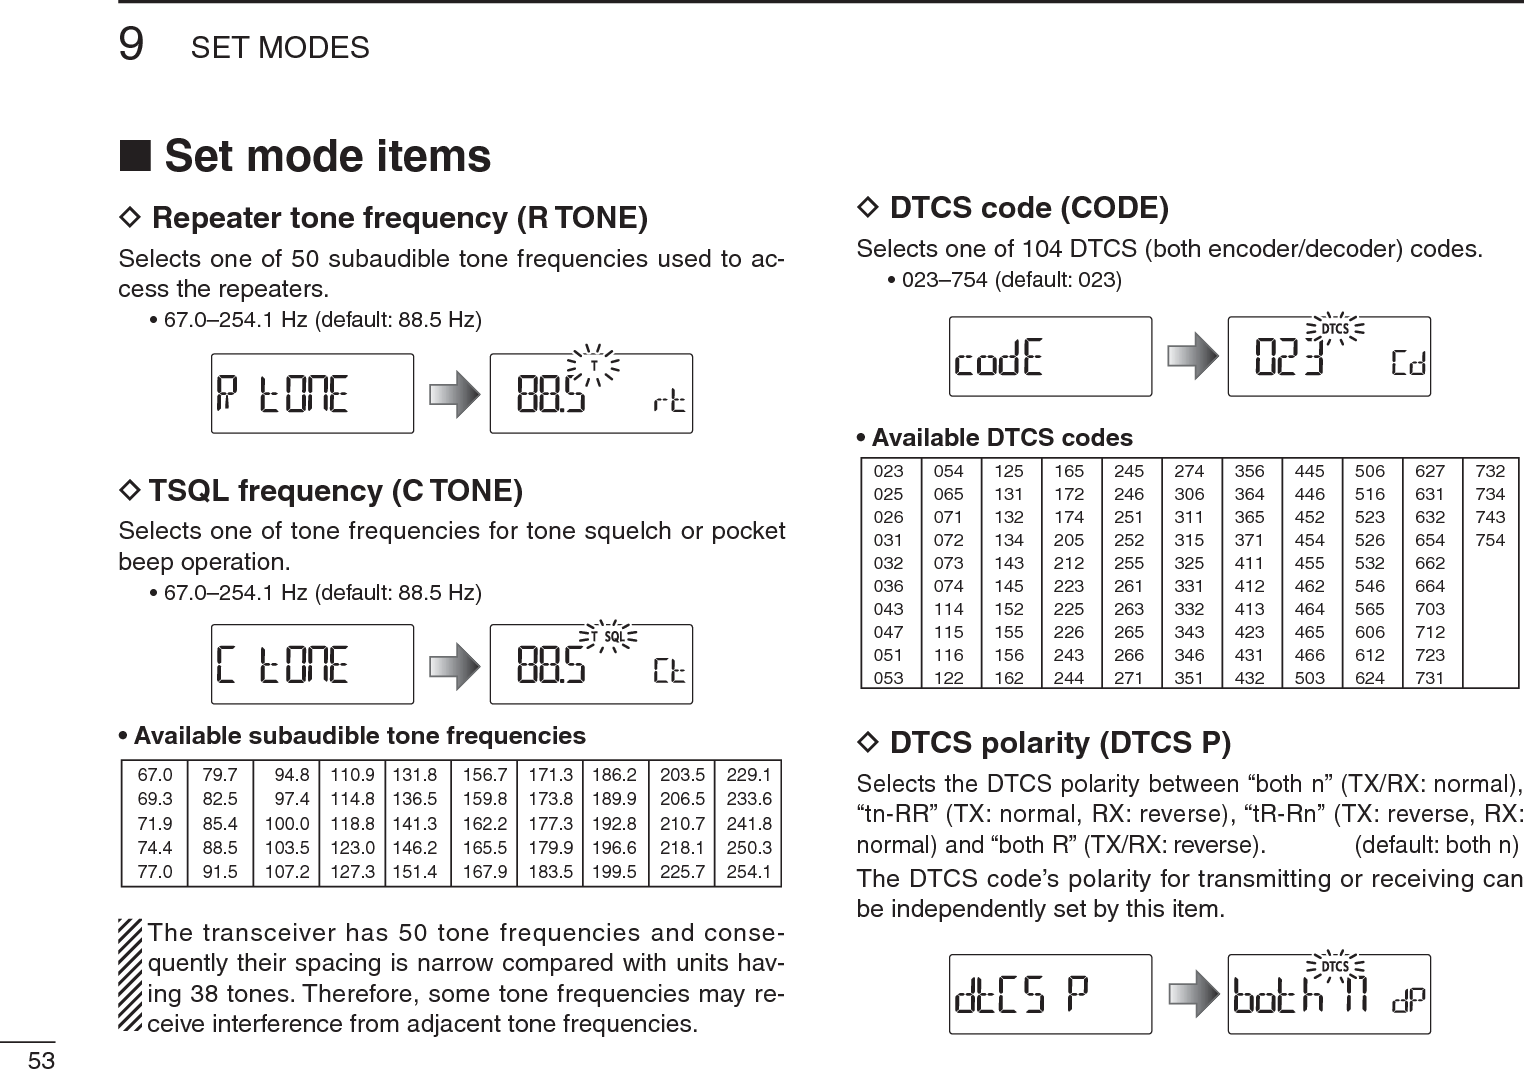 539SET MODESN Set mode itemsD Repeater tone frequency (R TONE)Selects one of 50 subaudible tone frequencies used to ac-cess the repeaters.• 67.0–254.1 Hz (default: 88.5 Hz)D TSQL frequency (C TONE)Selects one of tone frequencies for tone squelch or pocket beep operation.• 67.0–254.1 Hz (default: 88.5 Hz)• Available subaudible tone frequencies 67.069.371.974.477.079.782.585.488.591.594.897.4100.0103.5107.2110.9114.8118.8123.0127.3131.8136.5141.3146.2151.4156.7159.8162.2165.5167.9171.3173.8177.3179.9183.5186.2189.9192.8196.6199.5203.5206.5210.7218.1225.7229.1233.6241.8250.3254.1The transceiver has 50 tone frequencies and conse-quently their spacing is narrow compared with units hav-ing 38 tones. Therefore, some tone frequencies may re-ceive interference from adjacent tone frequencies.DDTCS code (CODE)Selects one of 104 DTCS (both encoder/decoder) codes.• 023–754 (default: 023)• Available DTCS codes023025026031032036043047051053125131132134143145152155156162245246251252255261263265266271356364365371411412413423431432506516523526532546565606612624054065071072073074114115116122165172174205212223225226243244274306311315325331332343346351445446452454455462464465466503627631632654662664703712723731732734743754DDTCS polarity (DTCS P)Selects the DTCS polarity between “both n” (TX/RX: normal), “tn-RR” (TX: normal, RX: reverse), “tR-Rn” (TX: reverse, RX: normal) and “both R” (TX/RX: reverse).  (default: both n)The DTCS code’s polarity for transmitting or receiving can be independently set by this item.